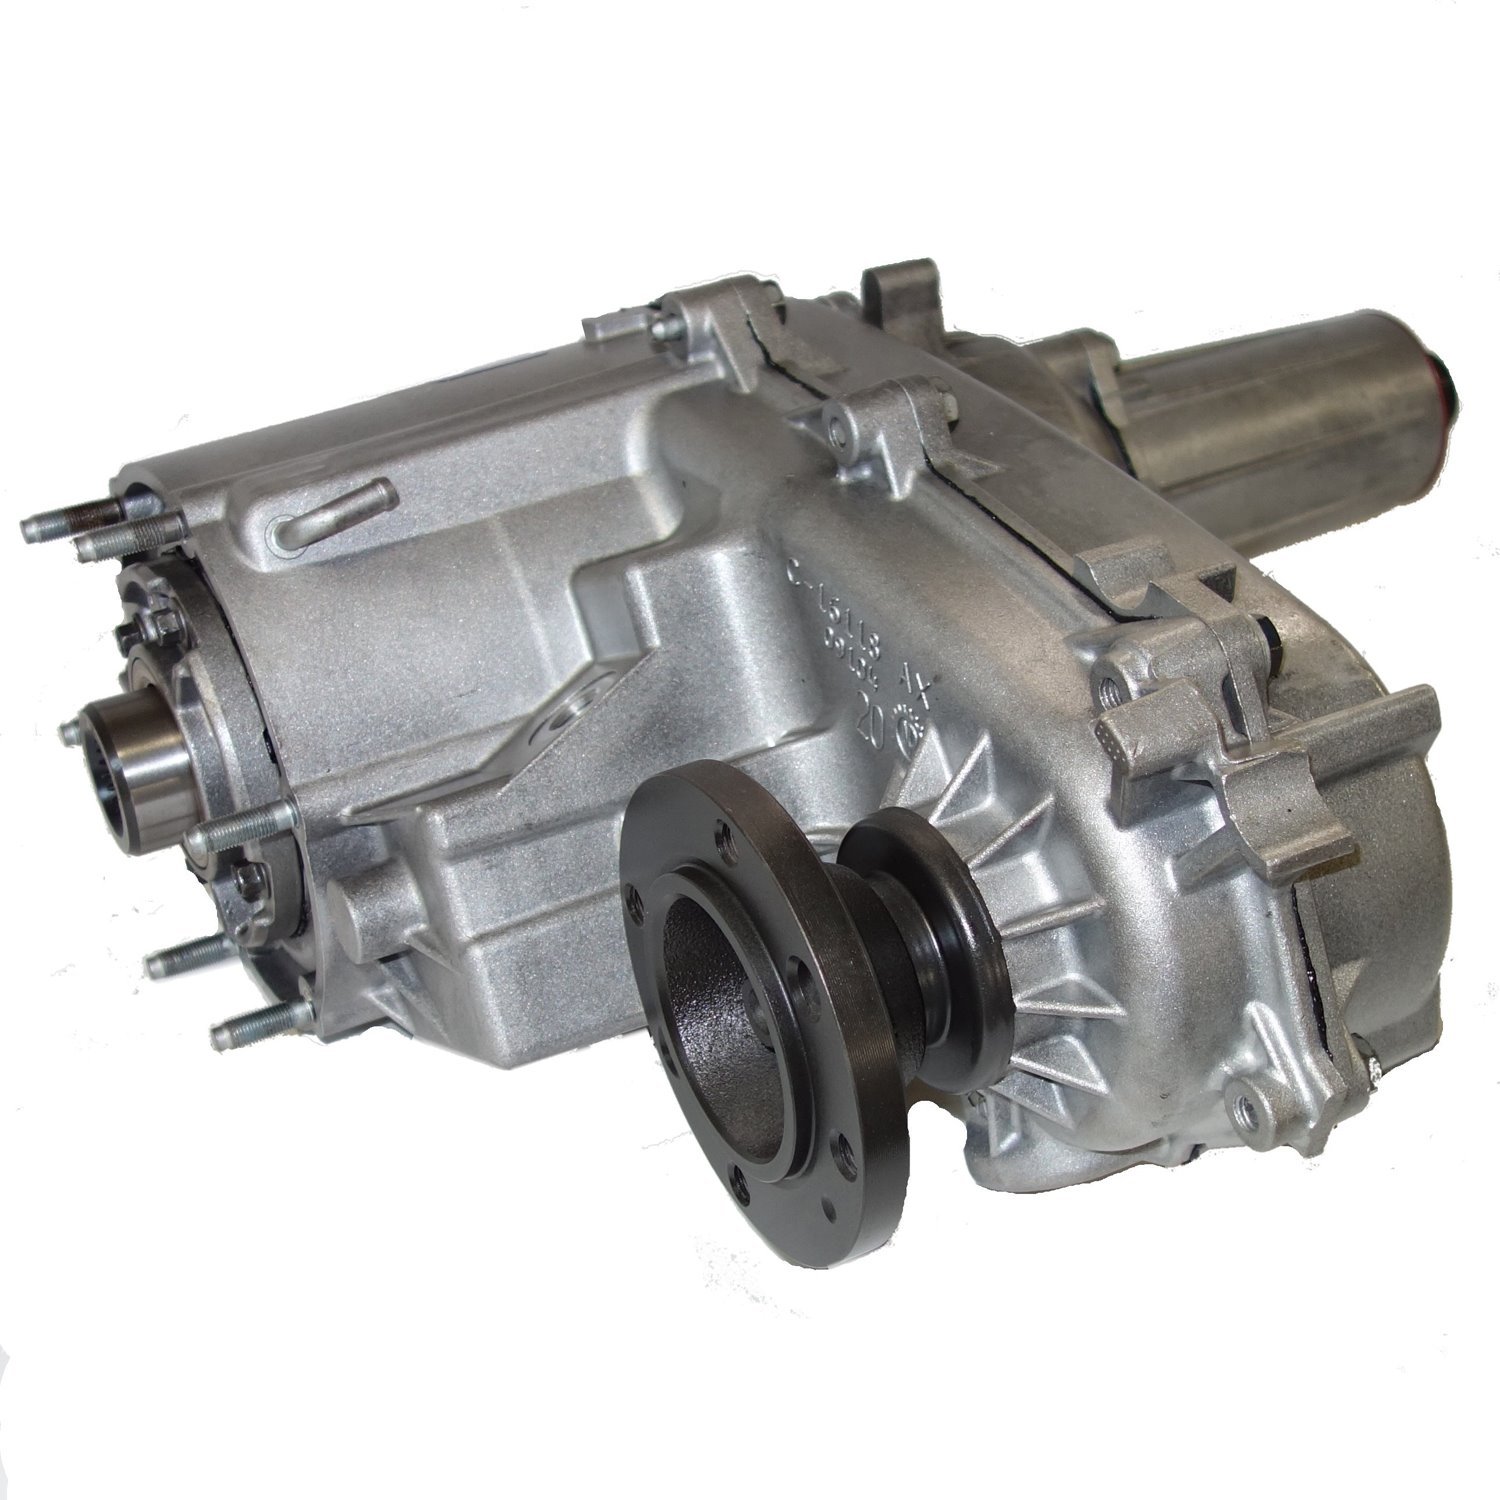 Remanufactured NP231 Transfer Case for Chrysler 98-01 Ram 1500, A/T